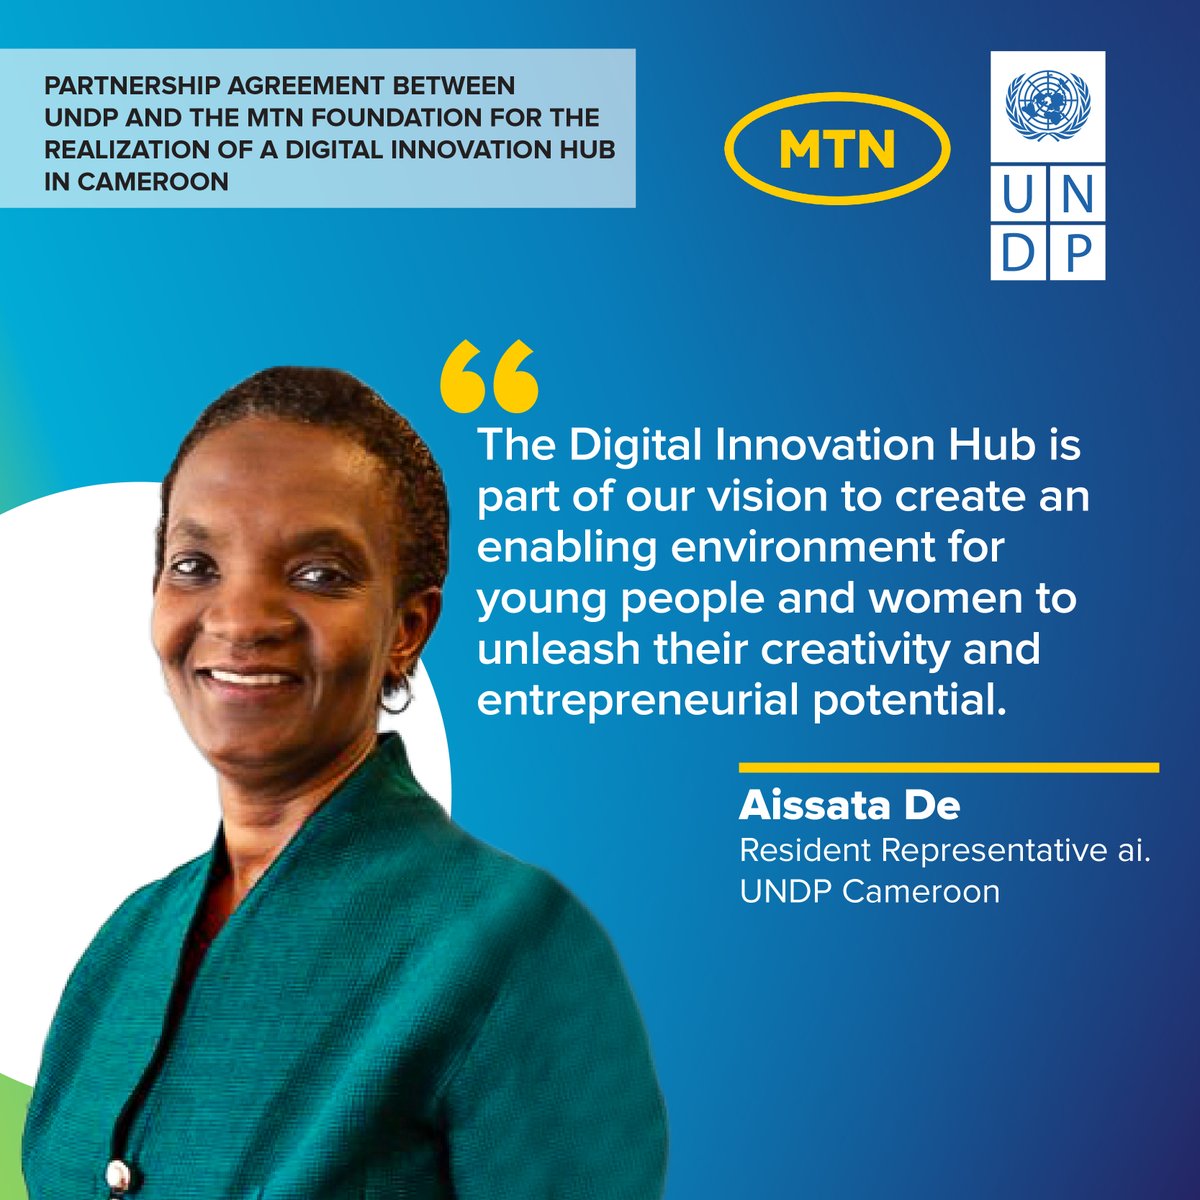 #UNDP Resident Representative, @DeAissata, reaffirms the importance of the Digital Innovation Hub as a critical and inclusive tool for the transformation of the Cameroon and Africa innovation ecosystems. #DoingGoodTogether #SDG9 #SDG17